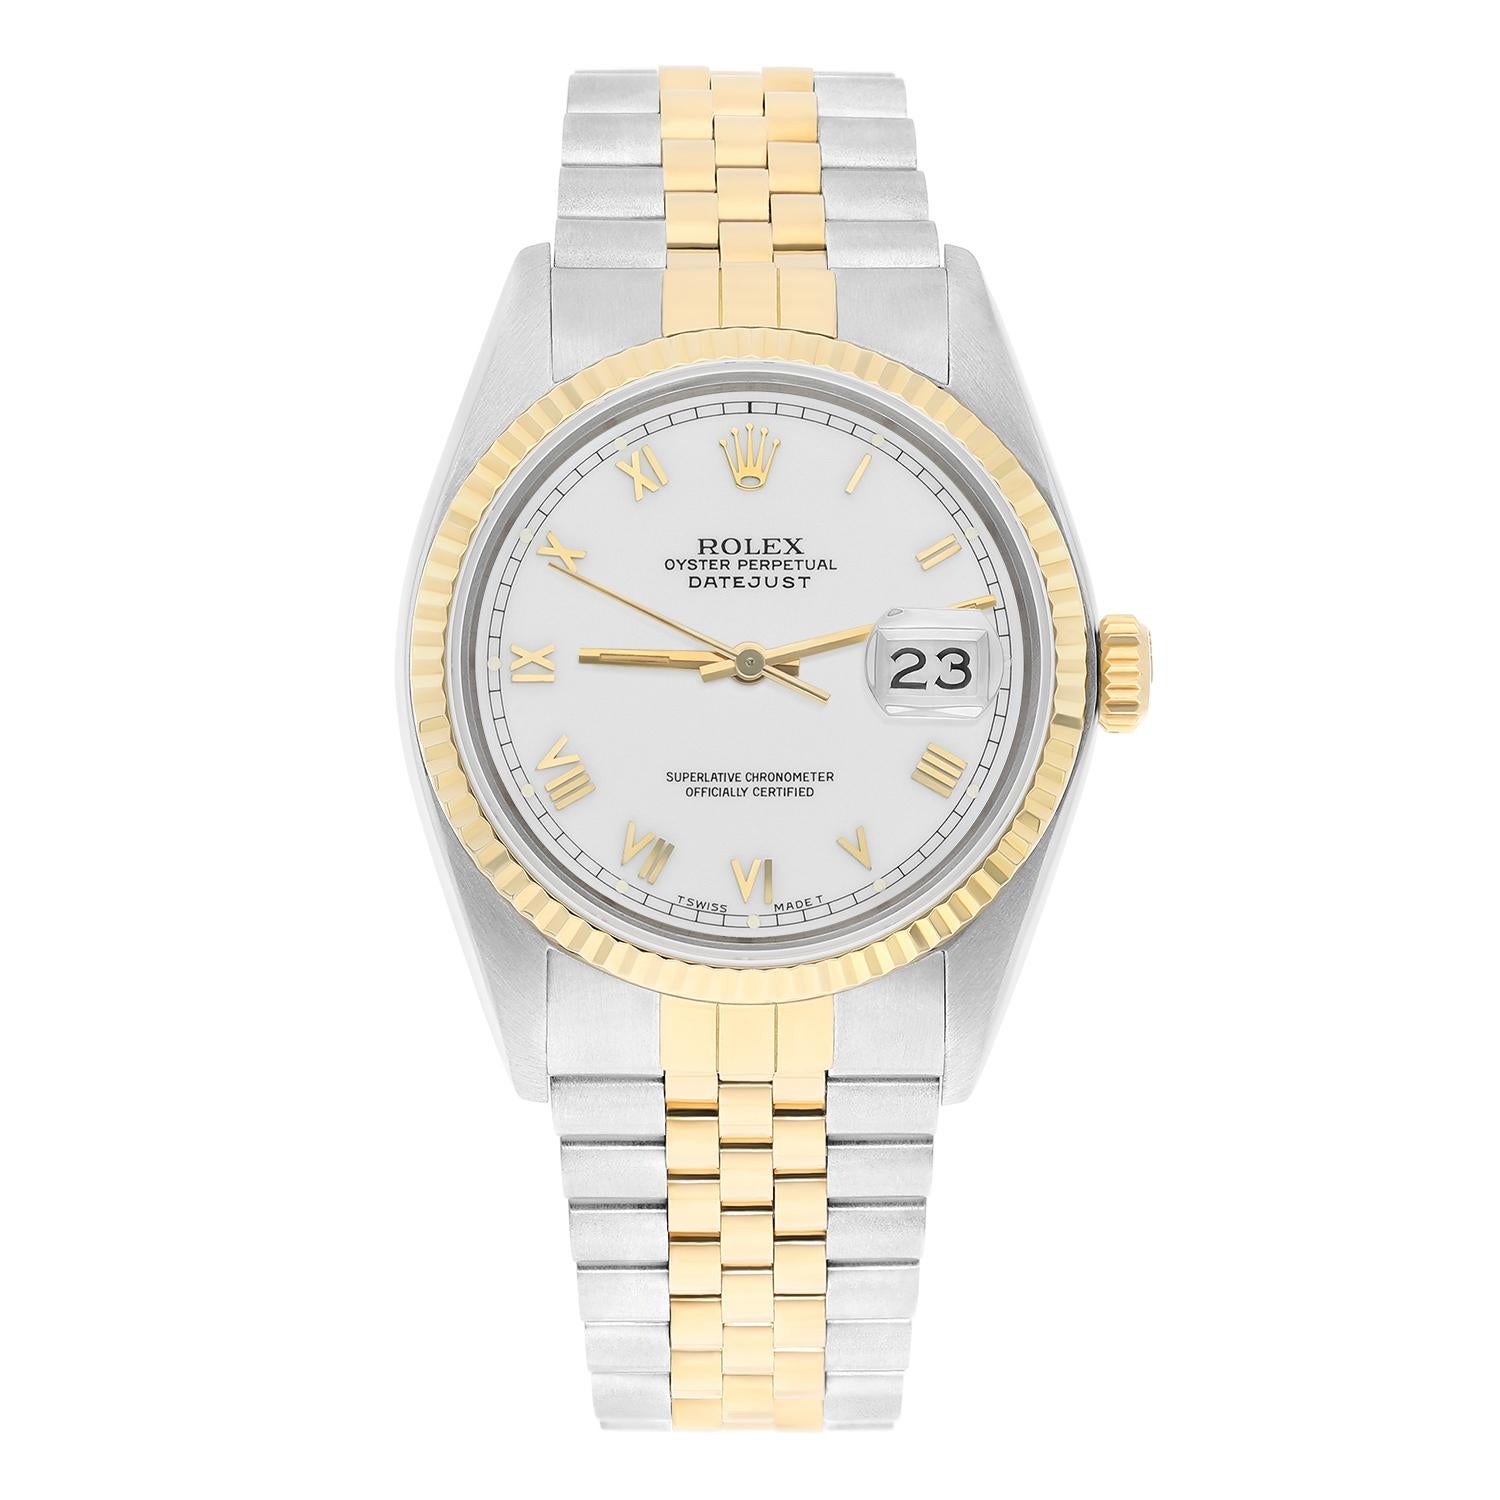 This watch has been professionally polished, serviced and is in excellent overall condition. There are absolutely no visible scratches or blemishes. Model features quick-set movement. Authenticity guaranteed! The sale comes with a Rolex box, and our